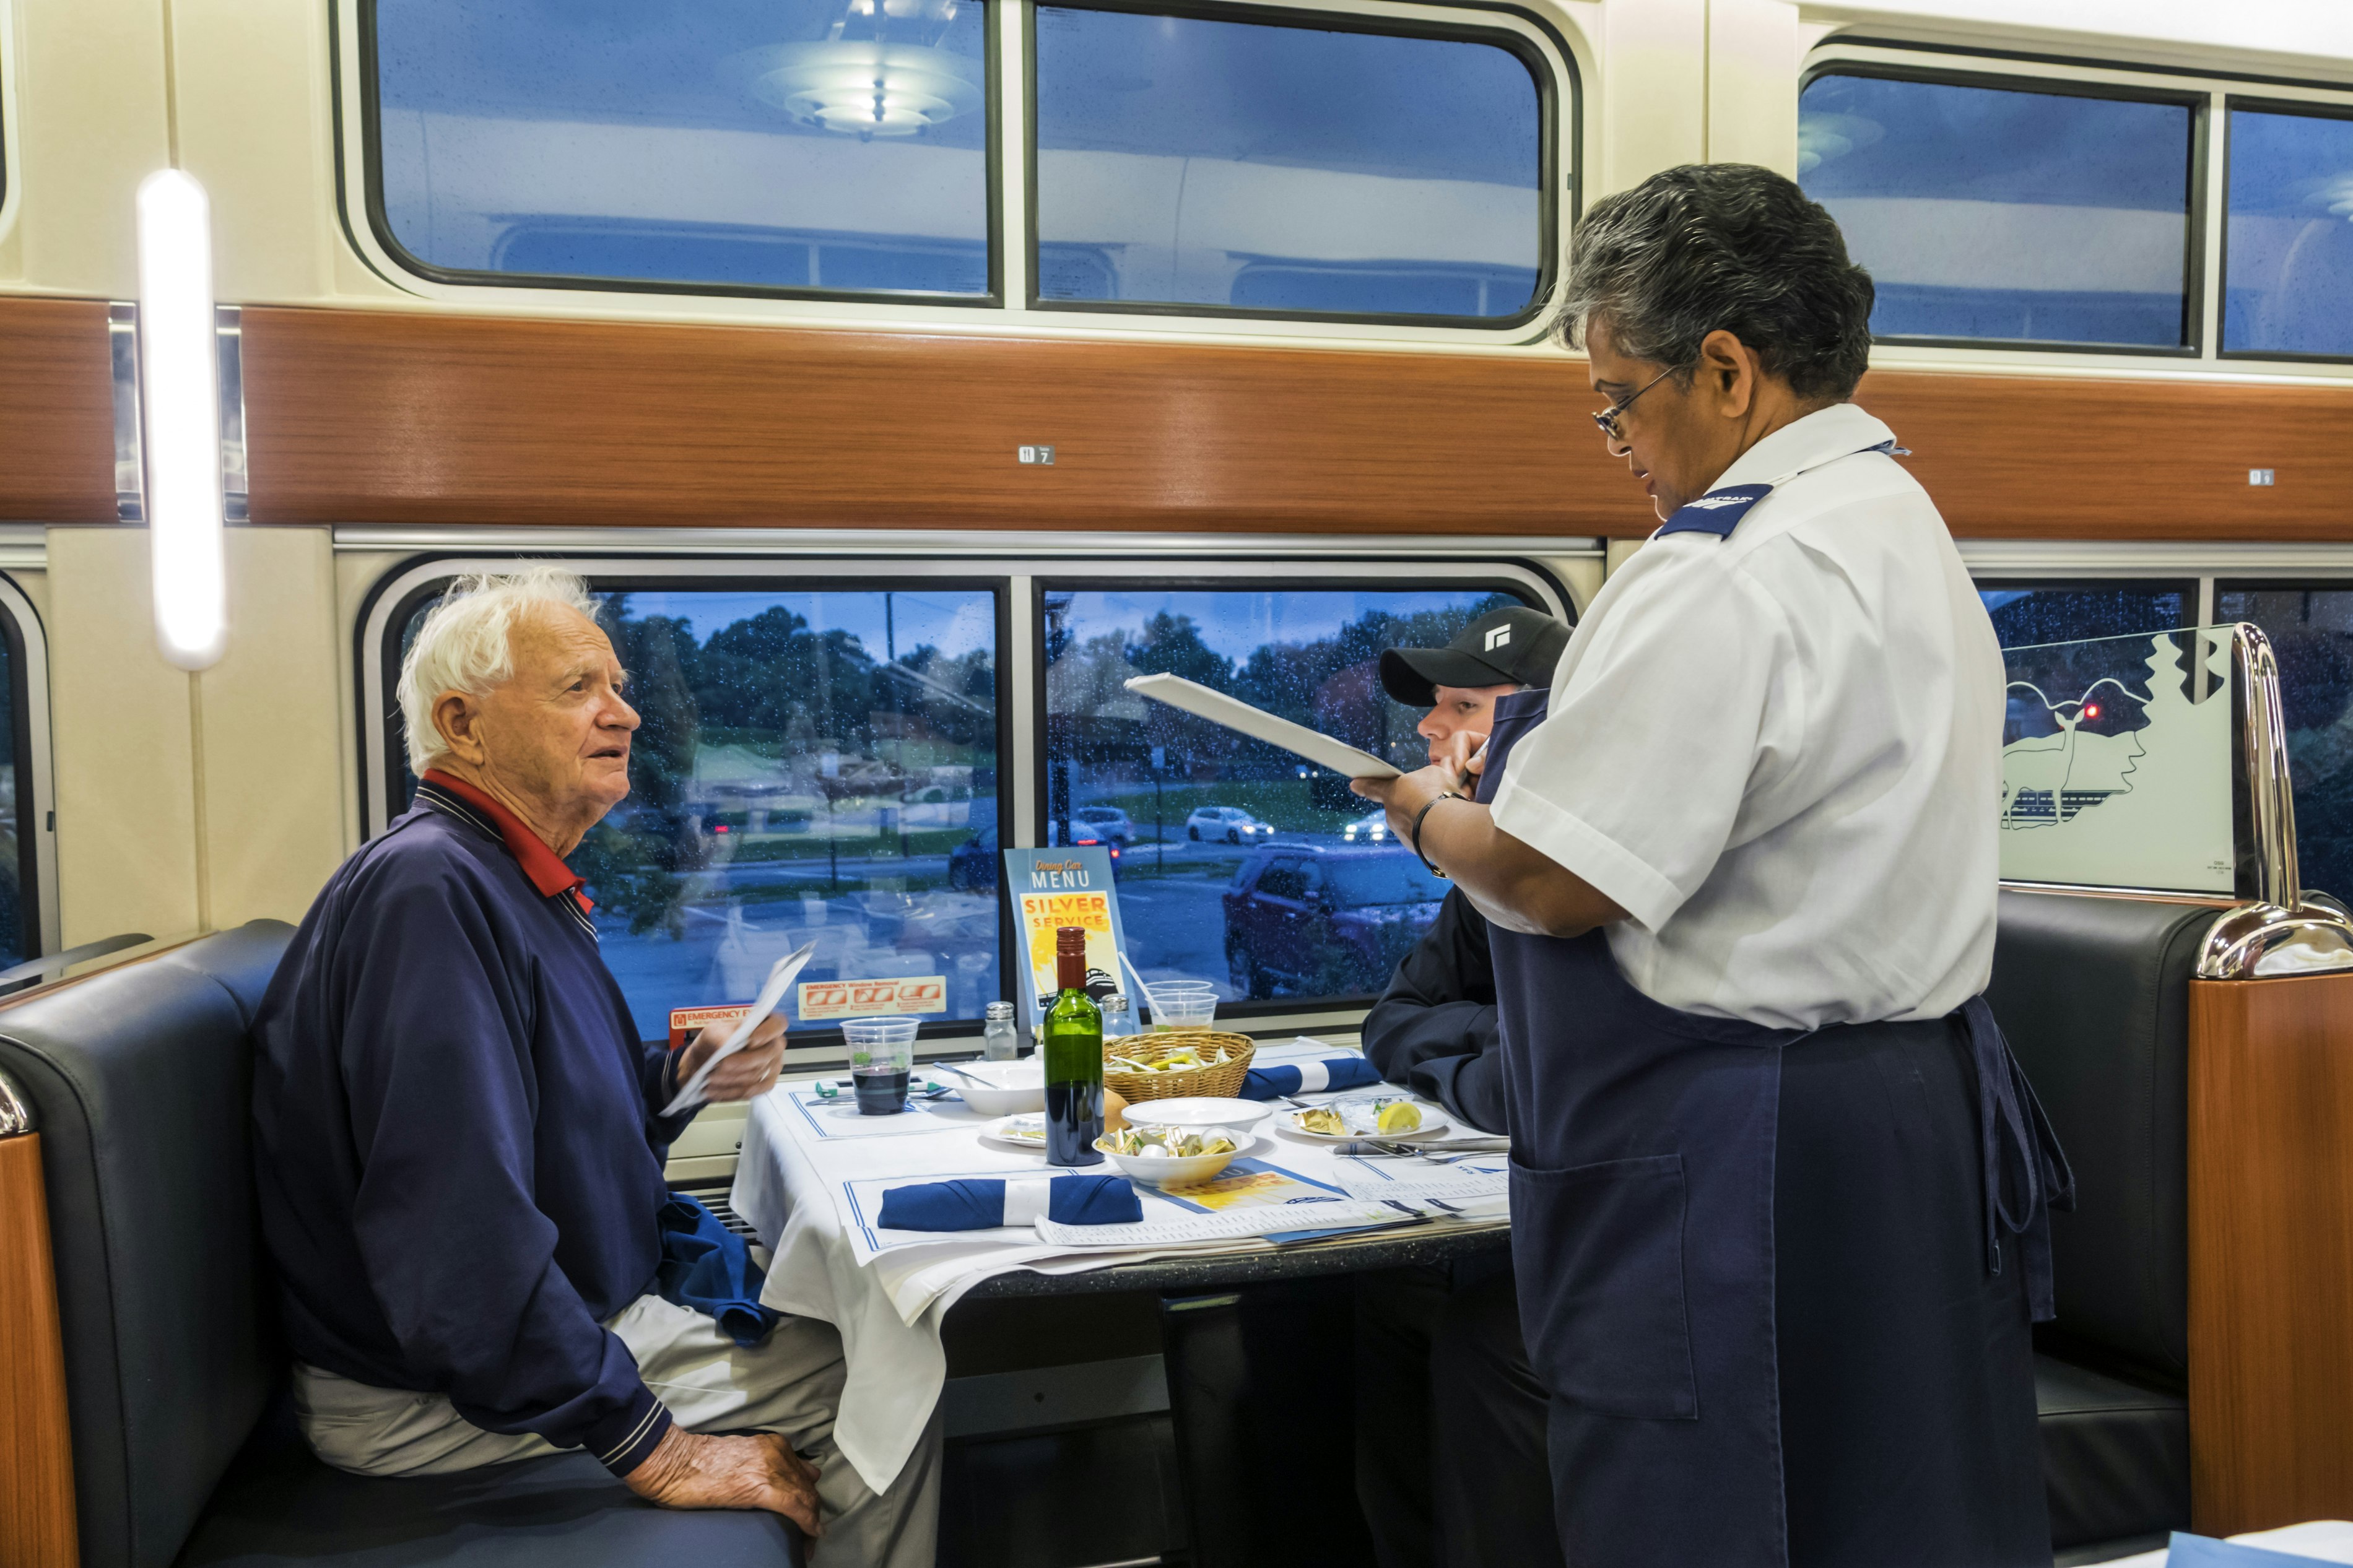 Amtrak dining car waiter takes a tablecloth-service food order from an elderly gentleman passenger